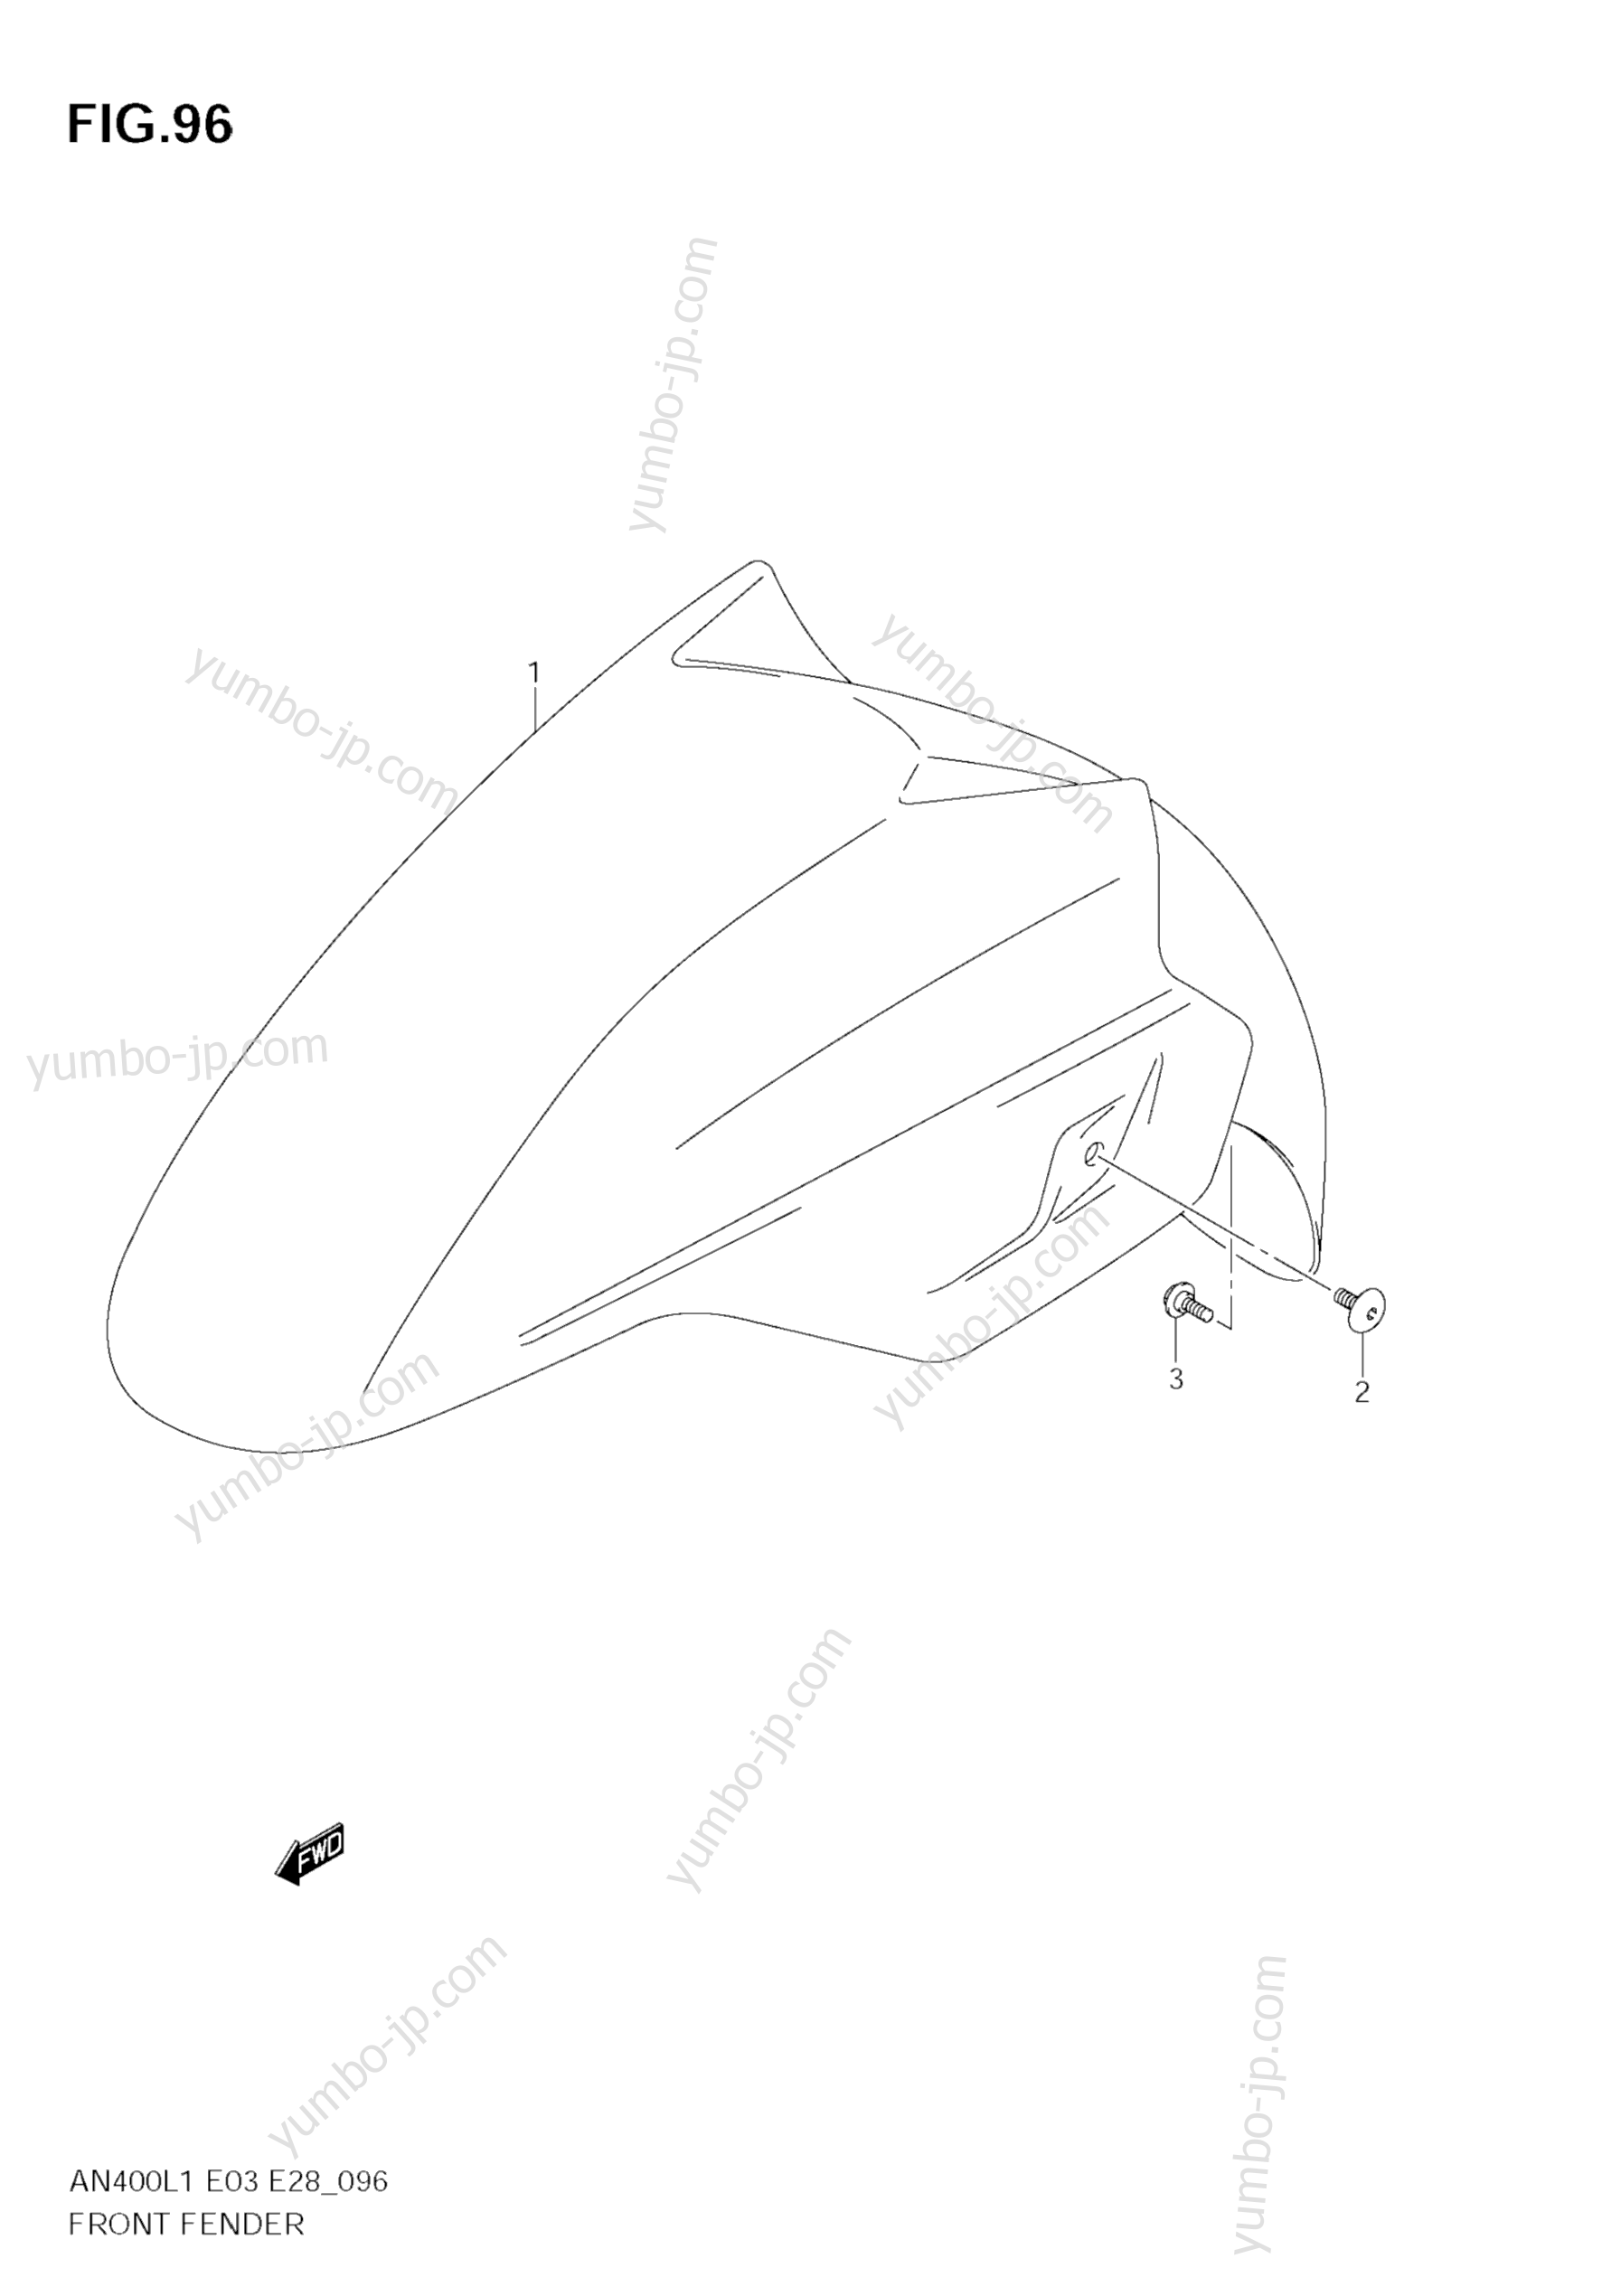 FRONT FENDER (AN400 L1 E33) for scooters SUZUKI Burgman (AN400) 2011 year